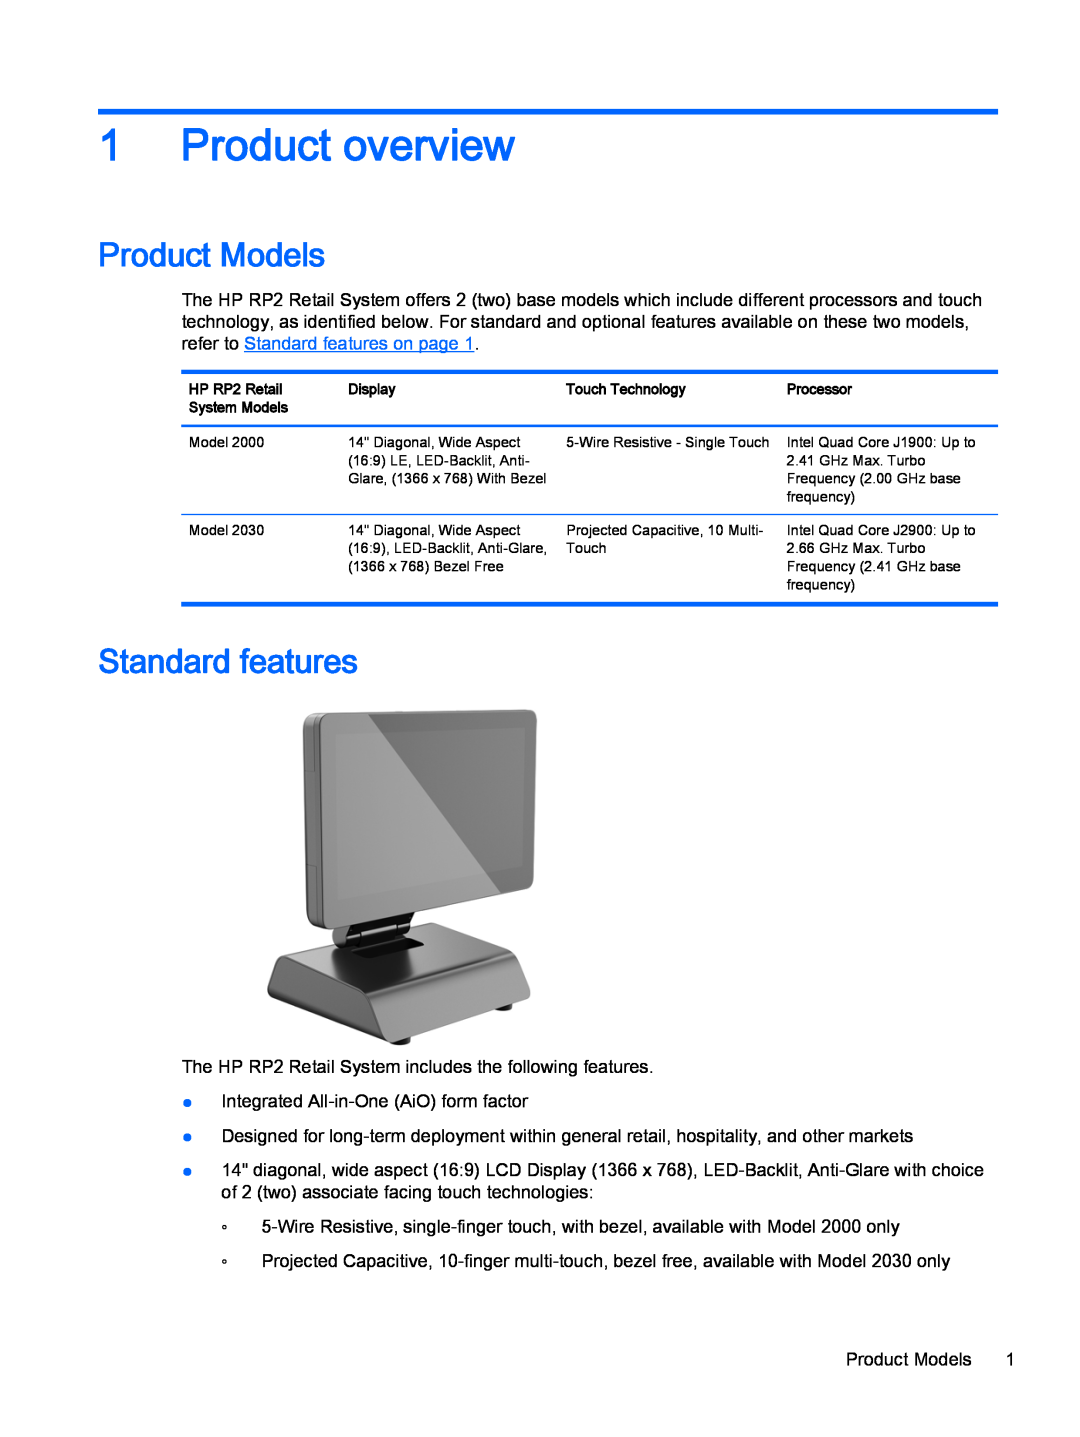 HP 2000 Base Model manual Product overview, Product Models, Standard features 